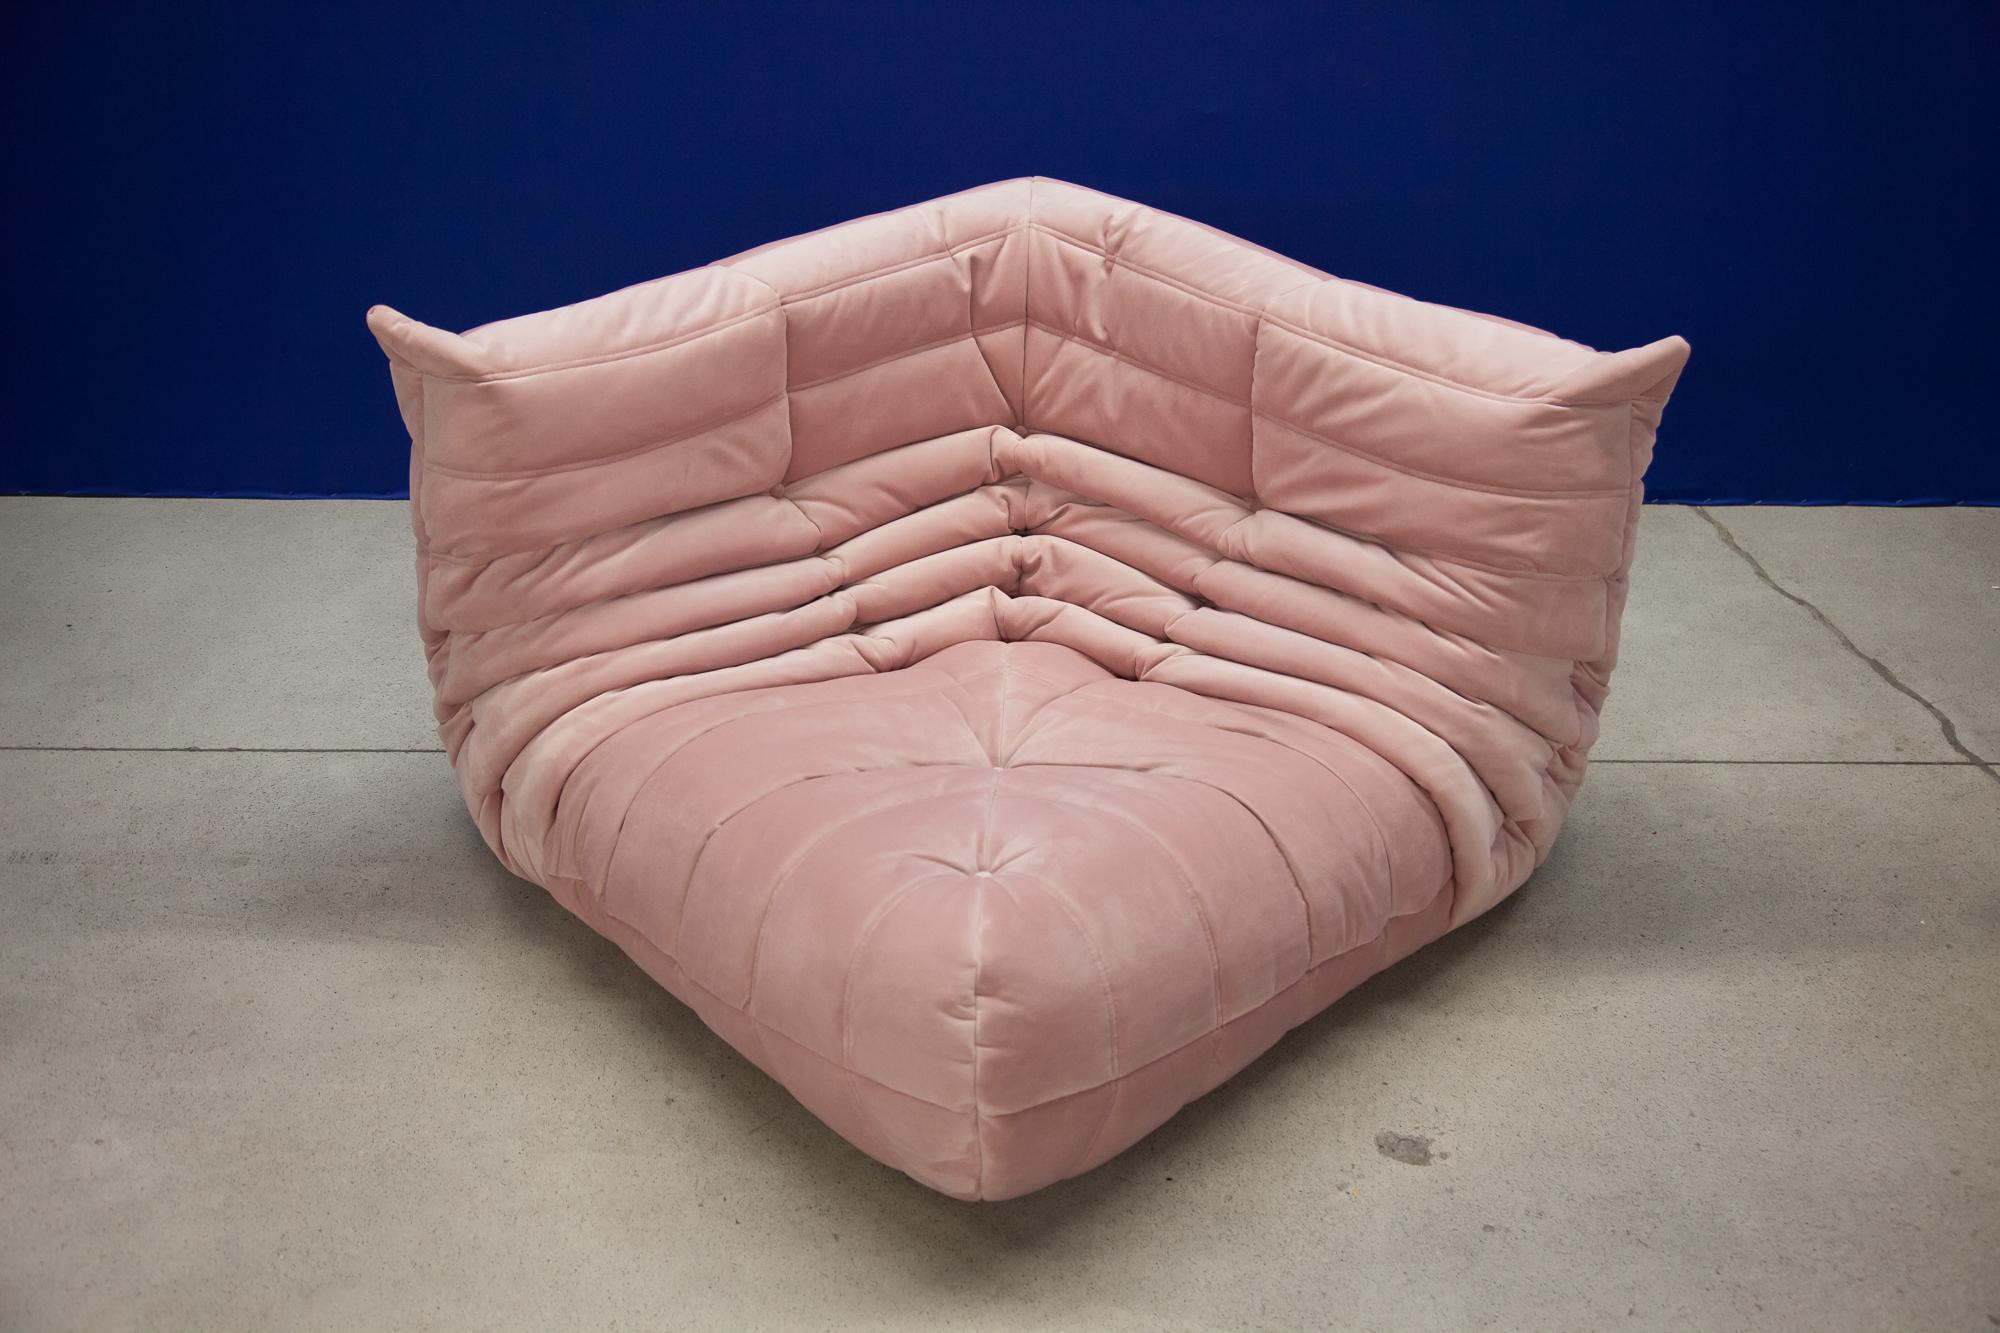 This Togo set including: 3-Seat, 2-seat and corner was designed by Michel Ducaroy in 1973 and was manufactured by Ligne Roset in France. It has been reupholstered in new pink velvet (70 x 174 x 102 cm). It has the original Ligne Roset logo and